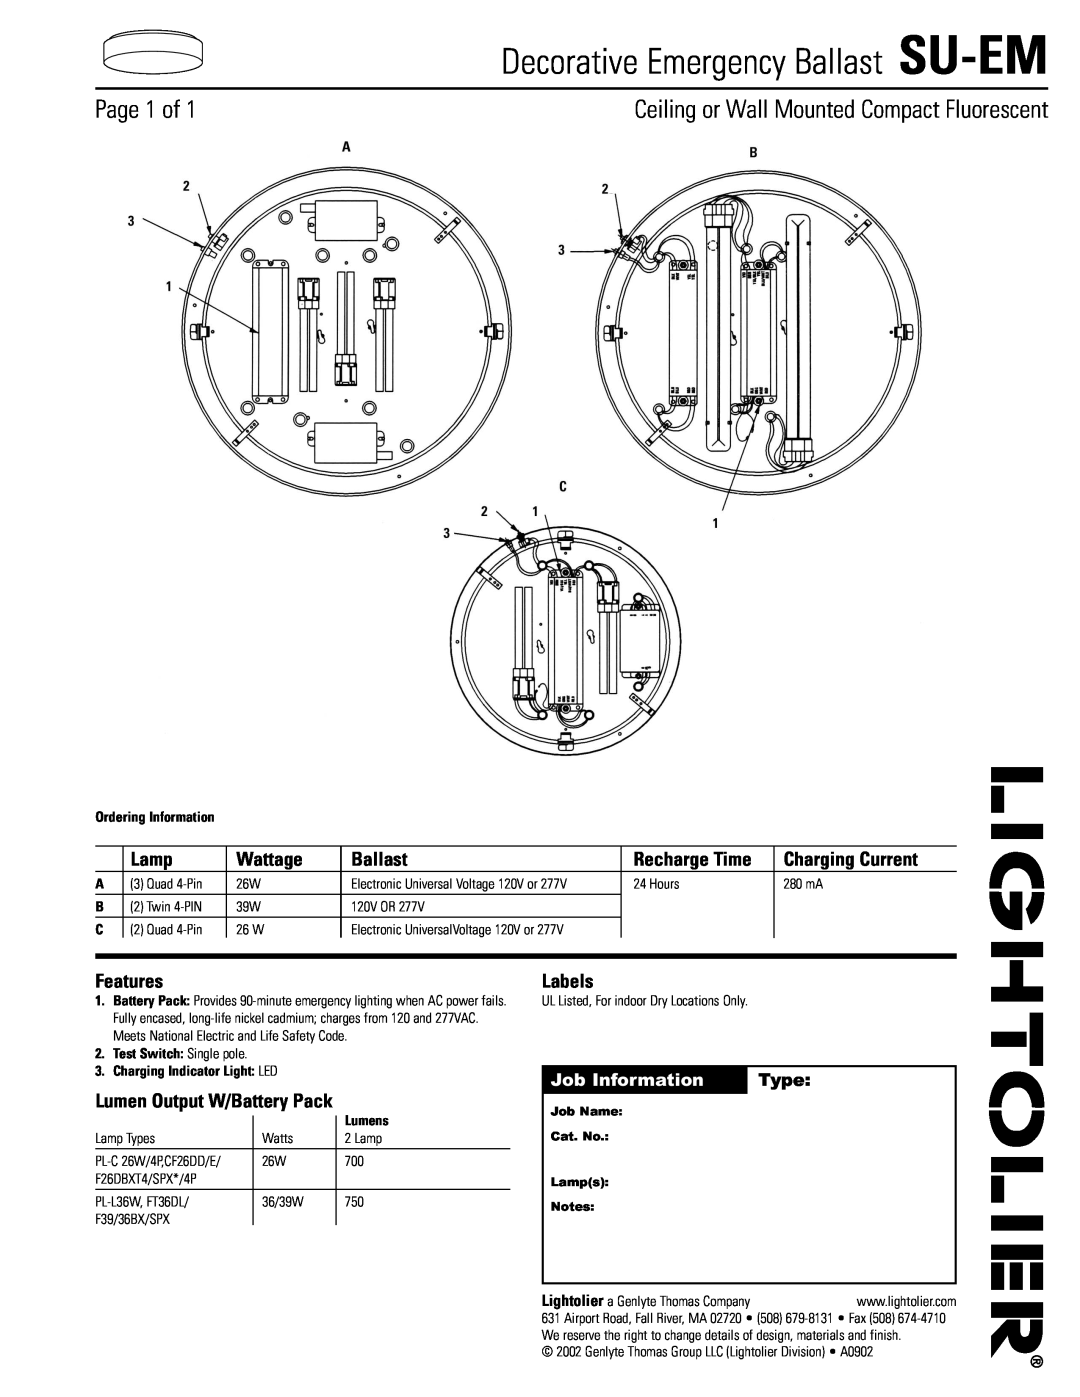 Lightolier manual Decorative Emergency Ballast SU-EM, Page 1 of, Ceiling or Wall Mounted Compact Fluorescent, Lamp 